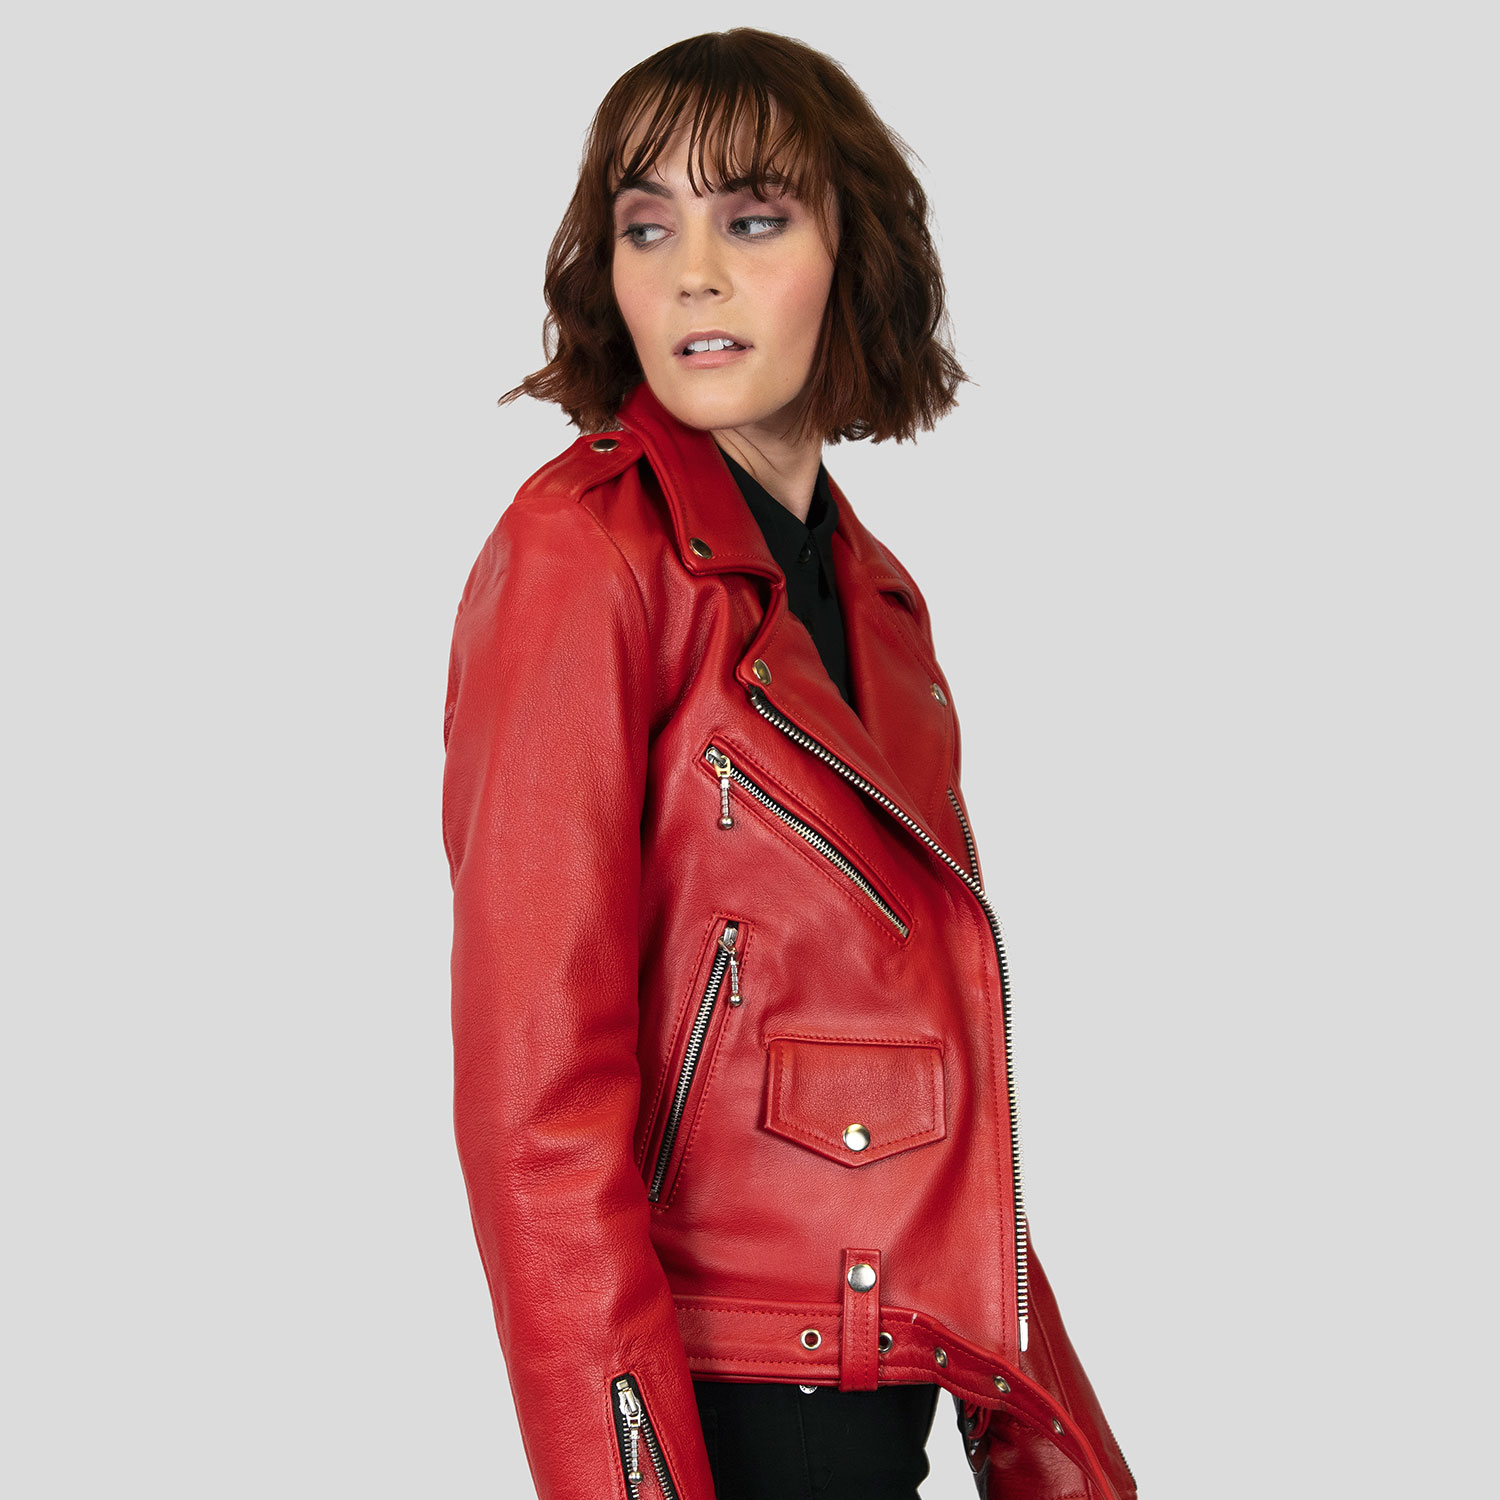 Commando - Blood Red Leather Jacket | Straight To Hell Apparel